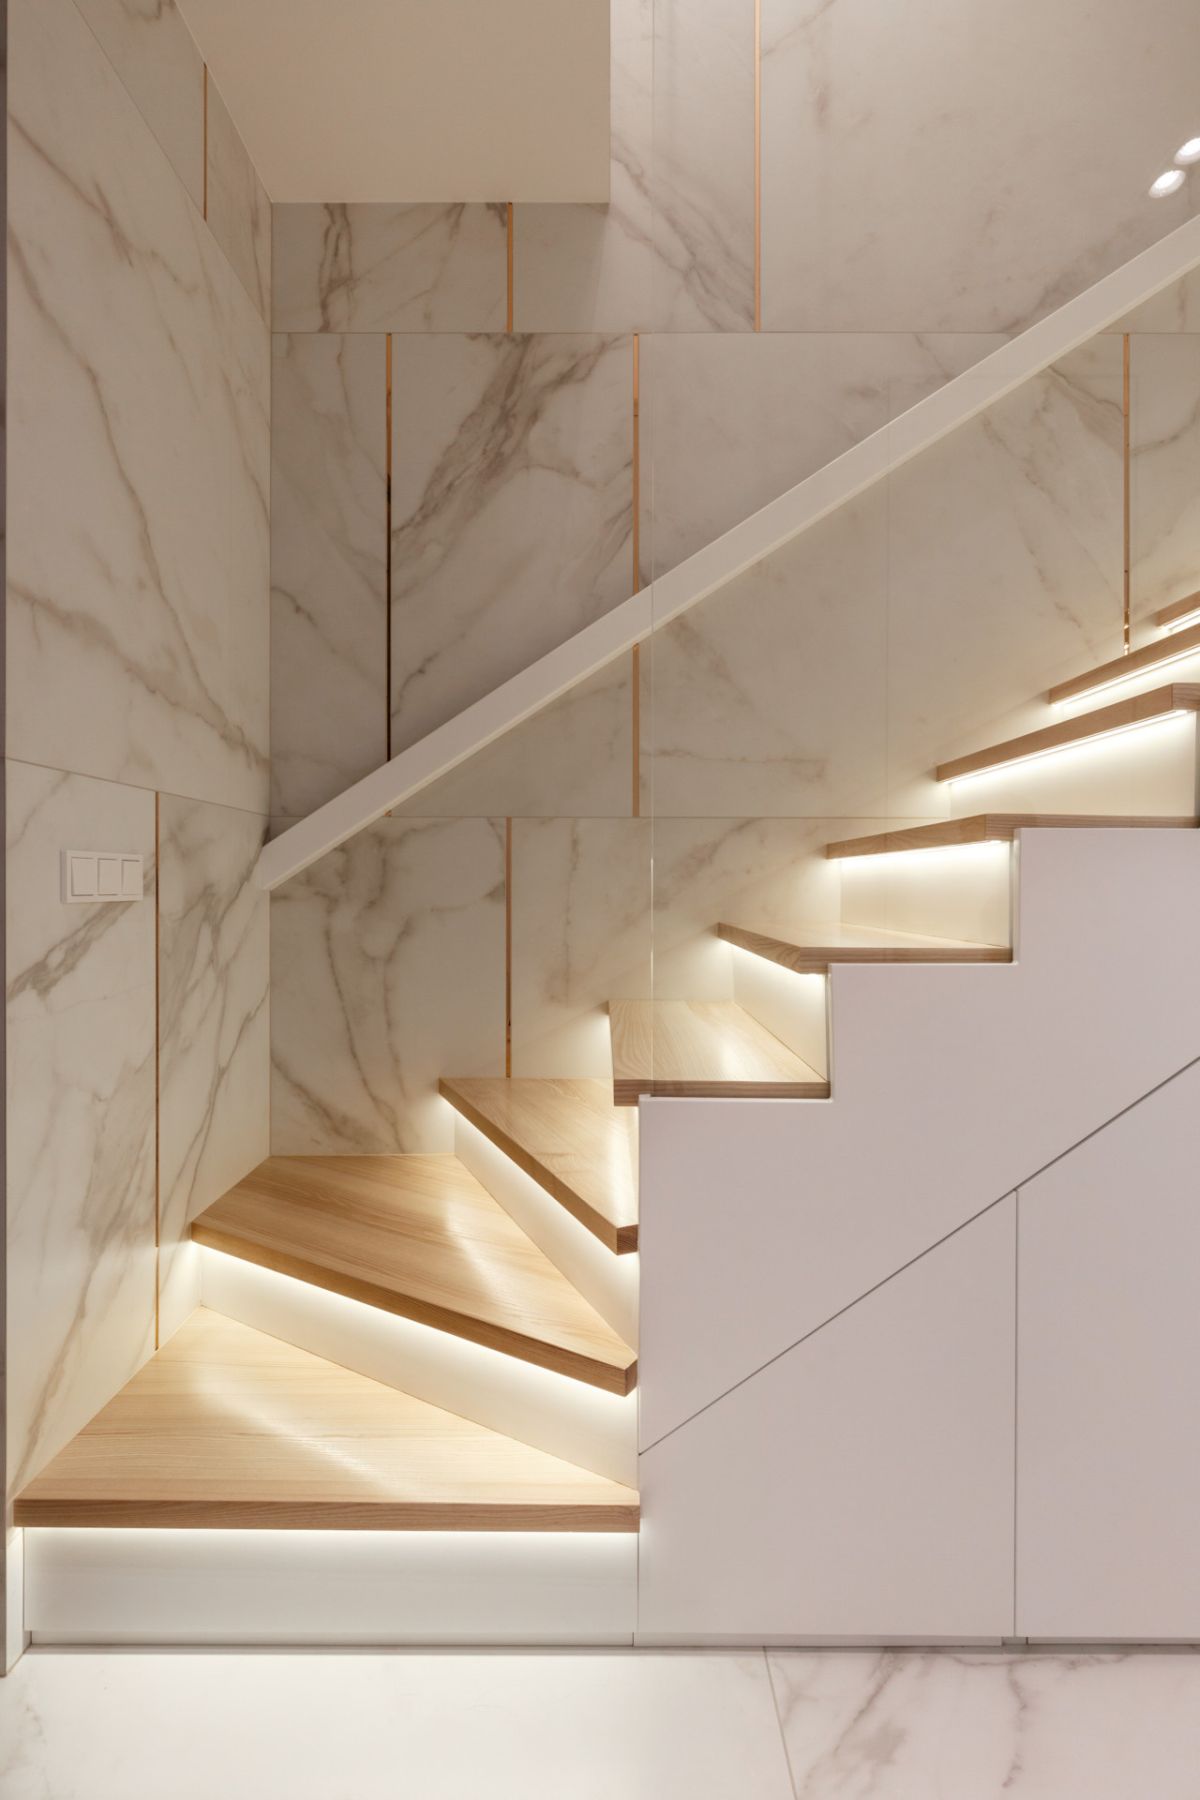 The staircase is very chic, done in white with additional lights